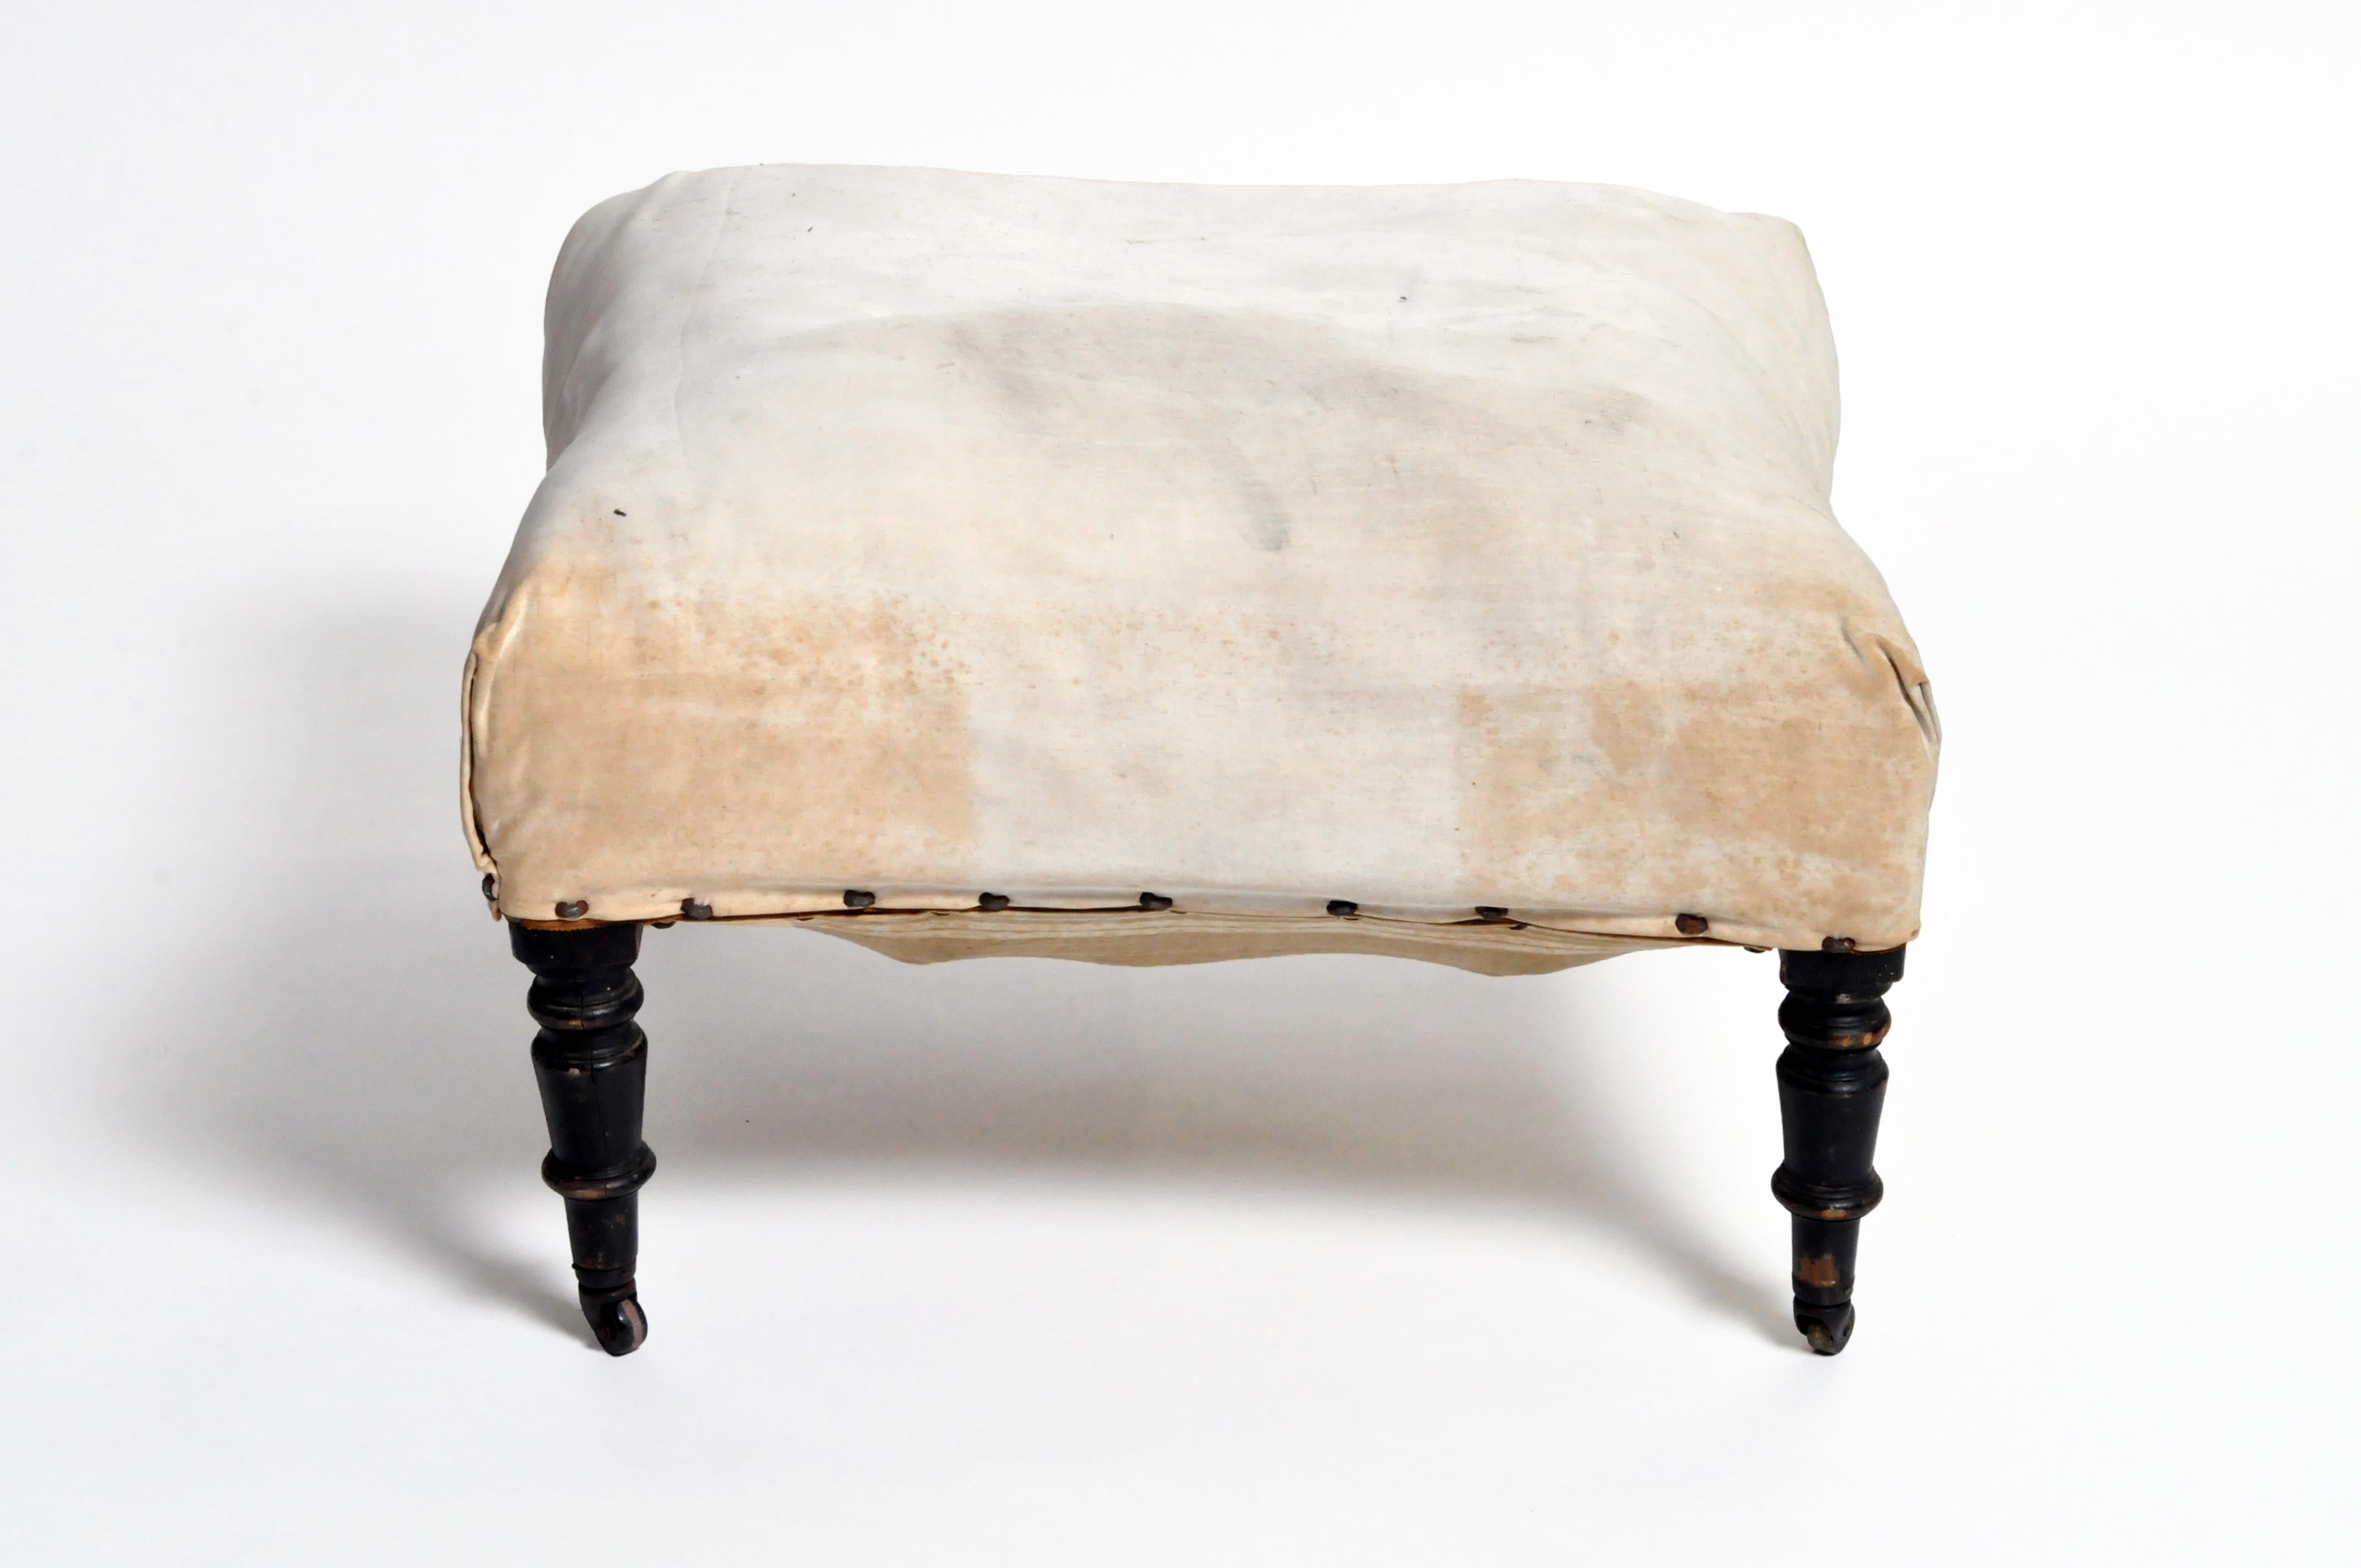 A Napoleon III foot stool from France, circa 19th century. Original stuffing and linen-cotton cover. Carved wood legs with black lacquer. All original.
   